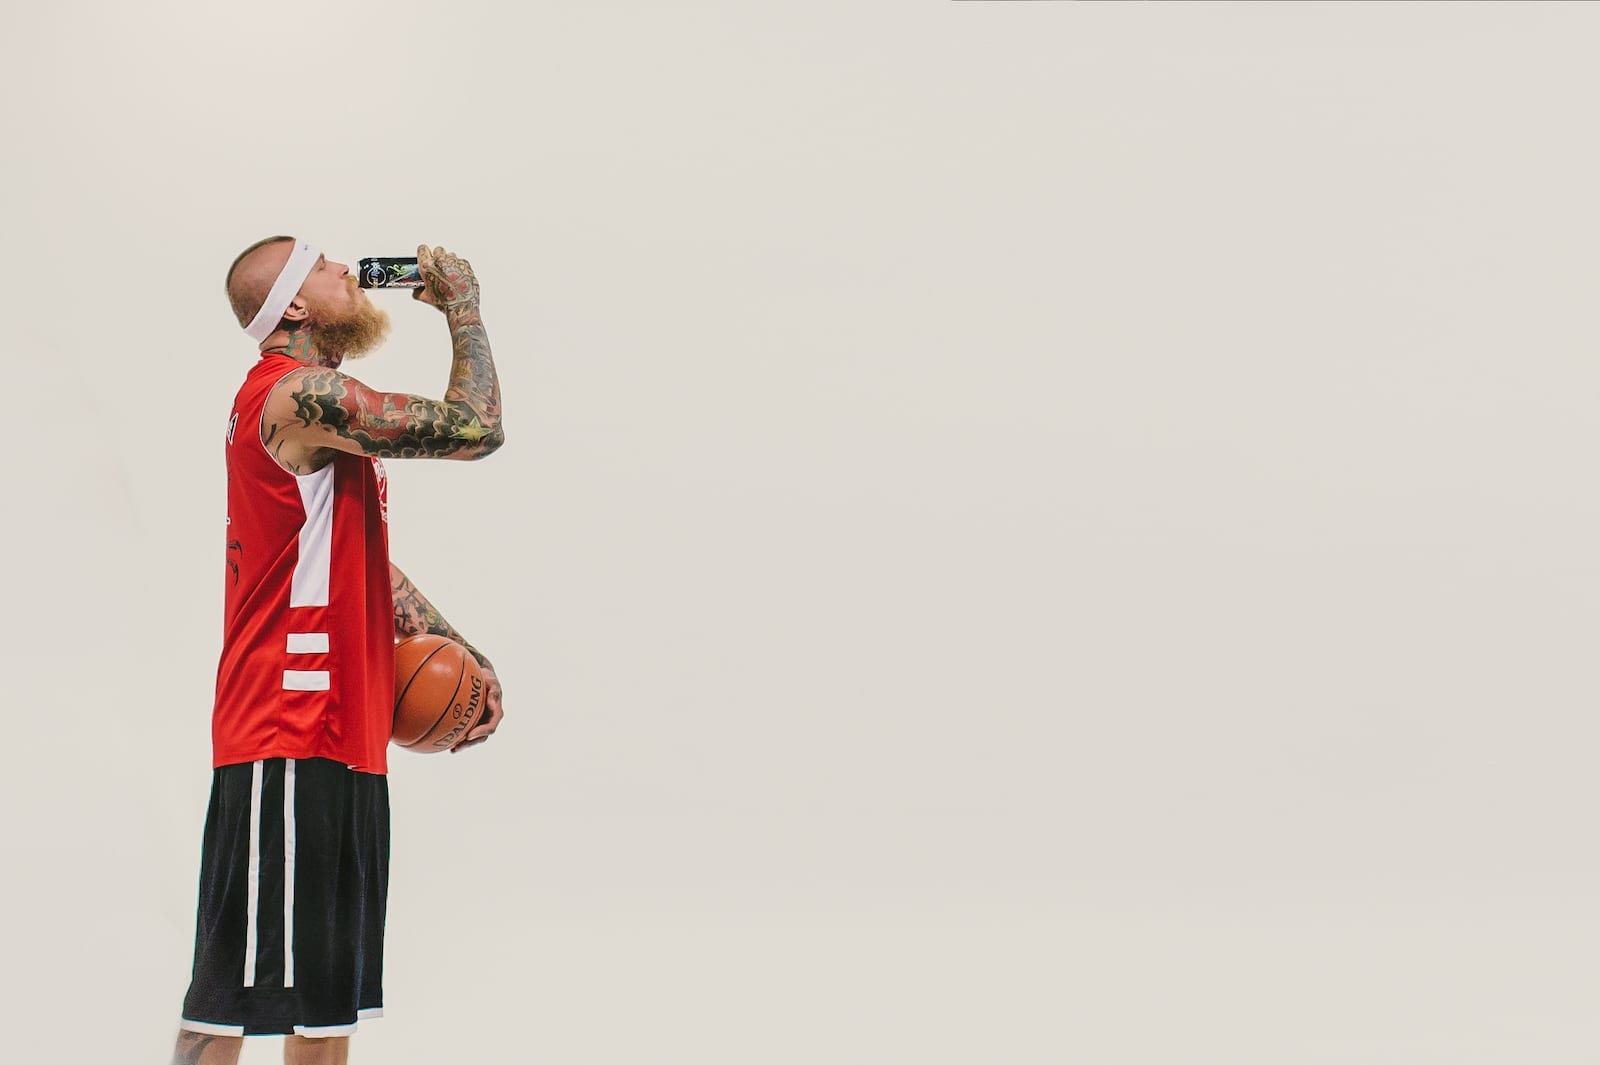 Side profile of a bearded tattooed man drinking from can of Hard Rock Energy drink wearing red Hard Rock Energy jersey with black shorts holding a basketball